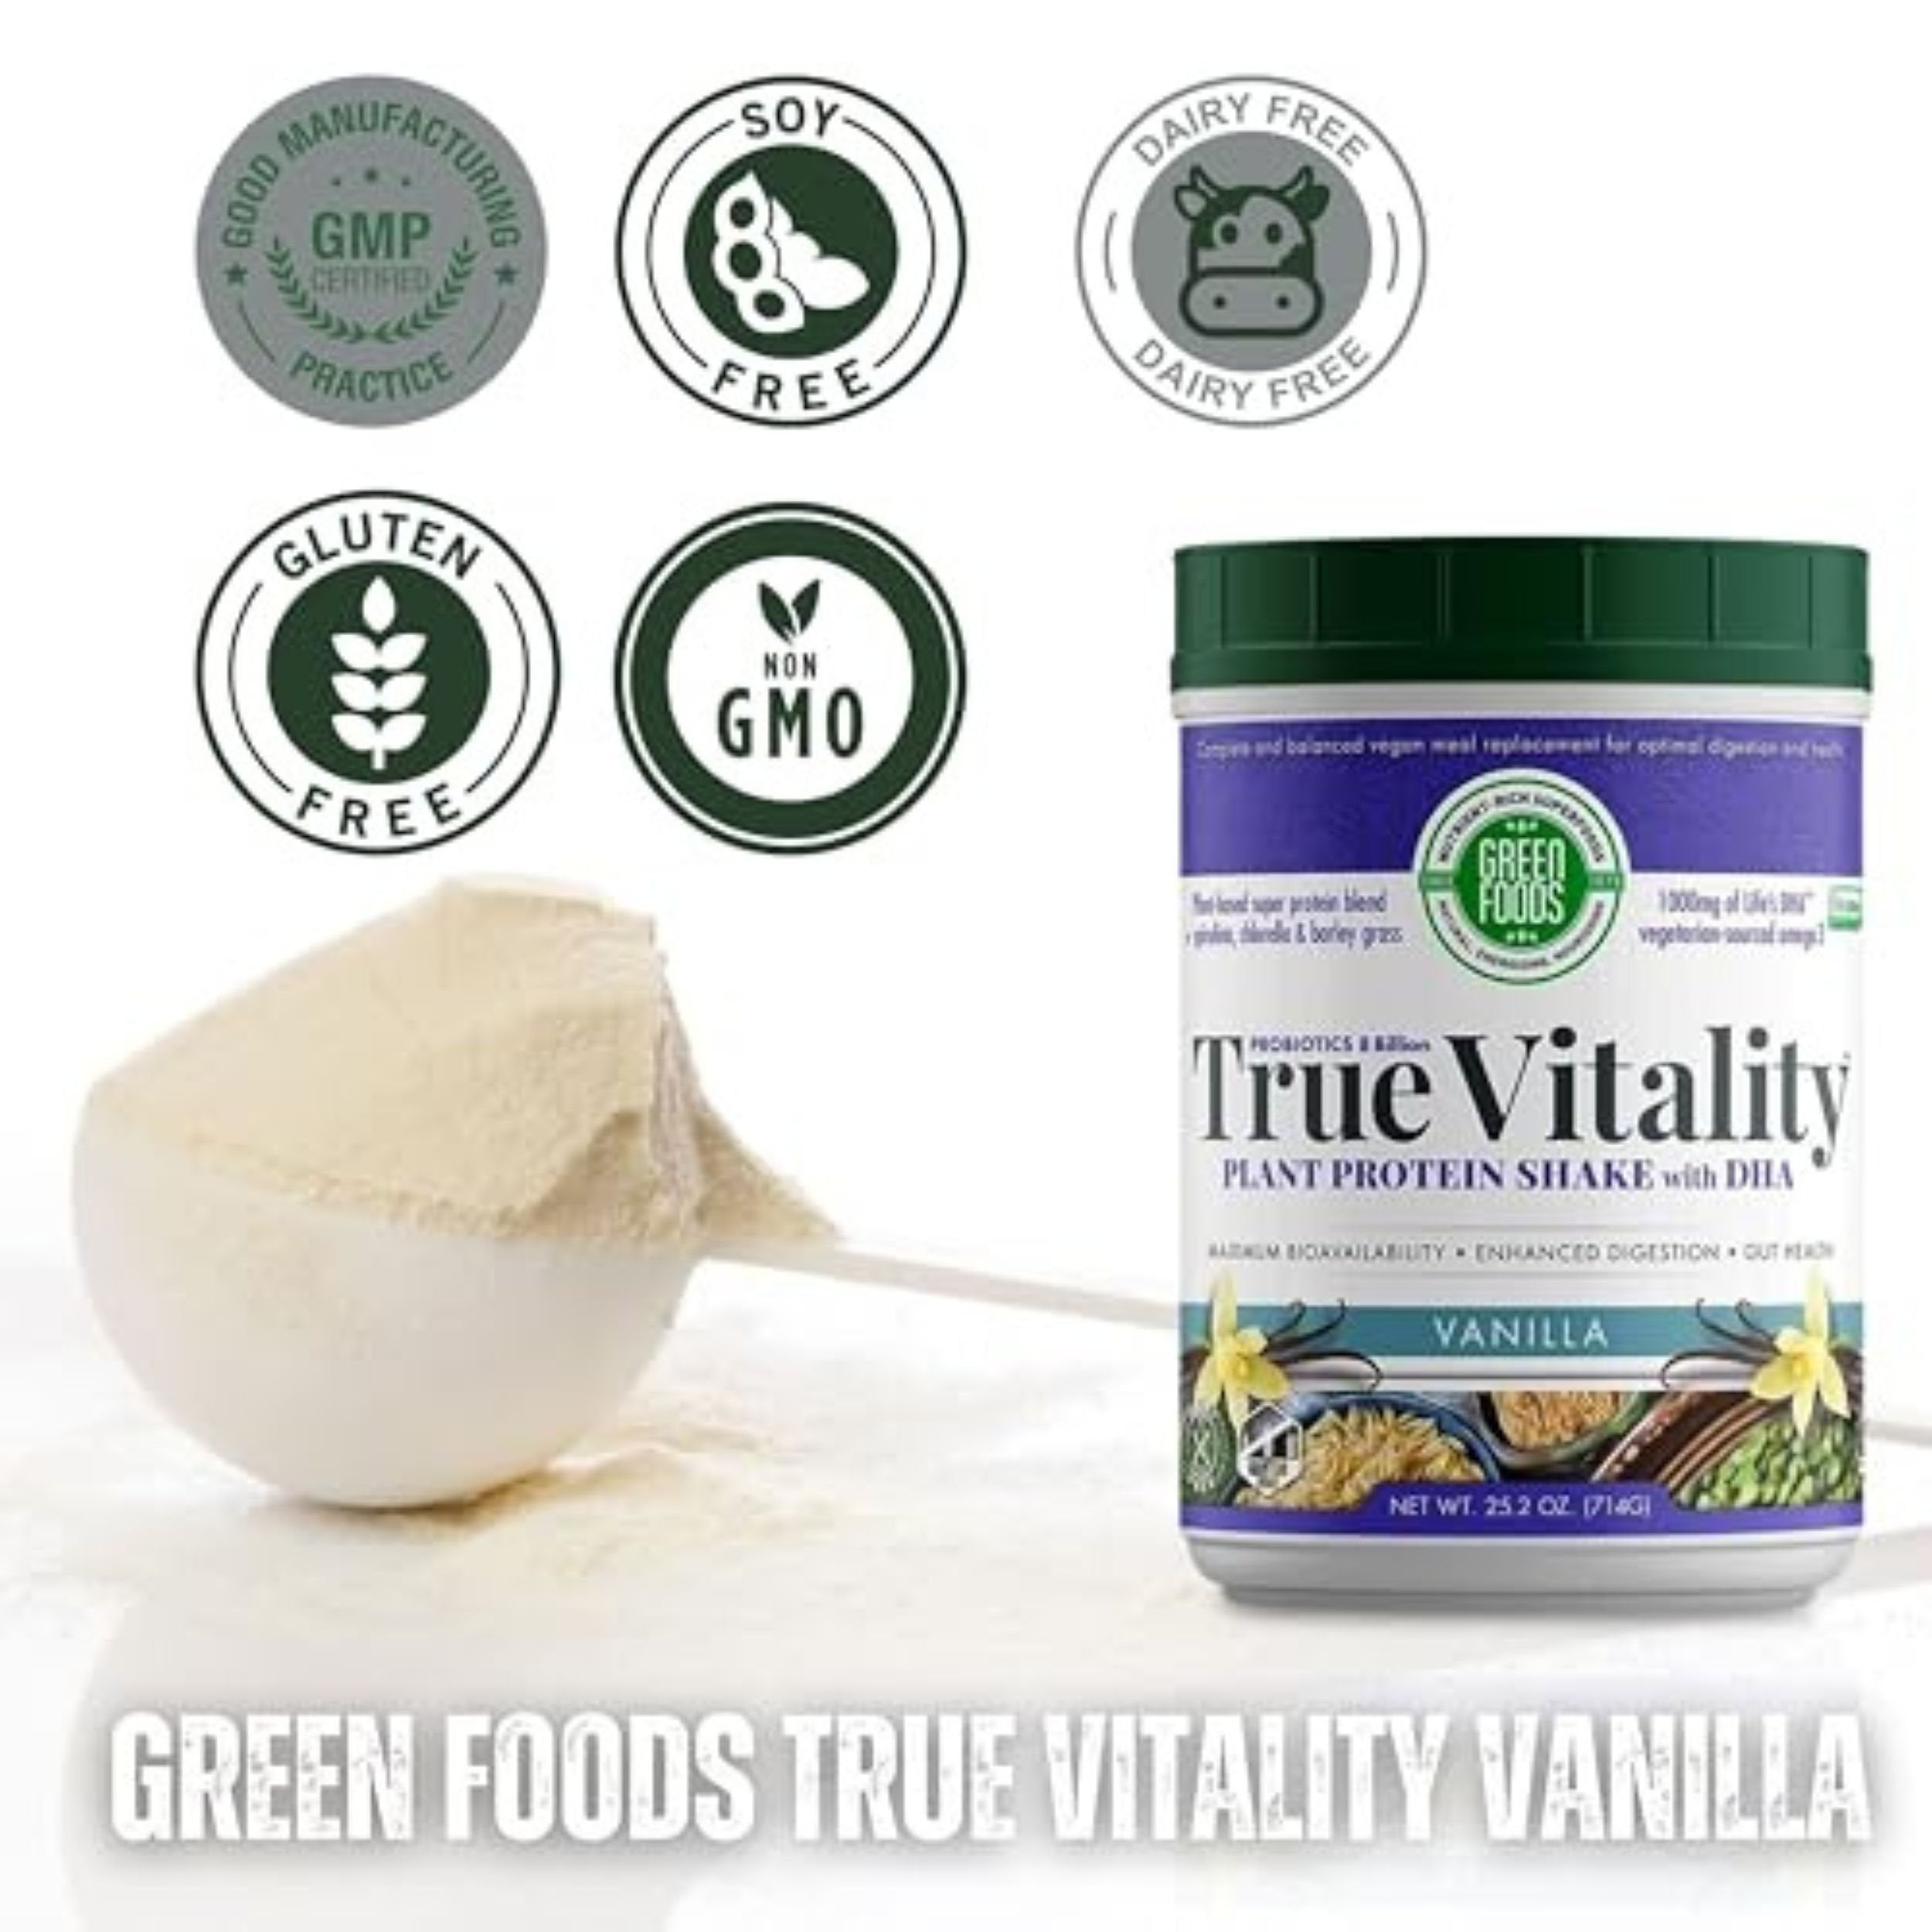 Green Foods True Vitality Plant Protein Shake with DHA Vanilla - 25.2 oz